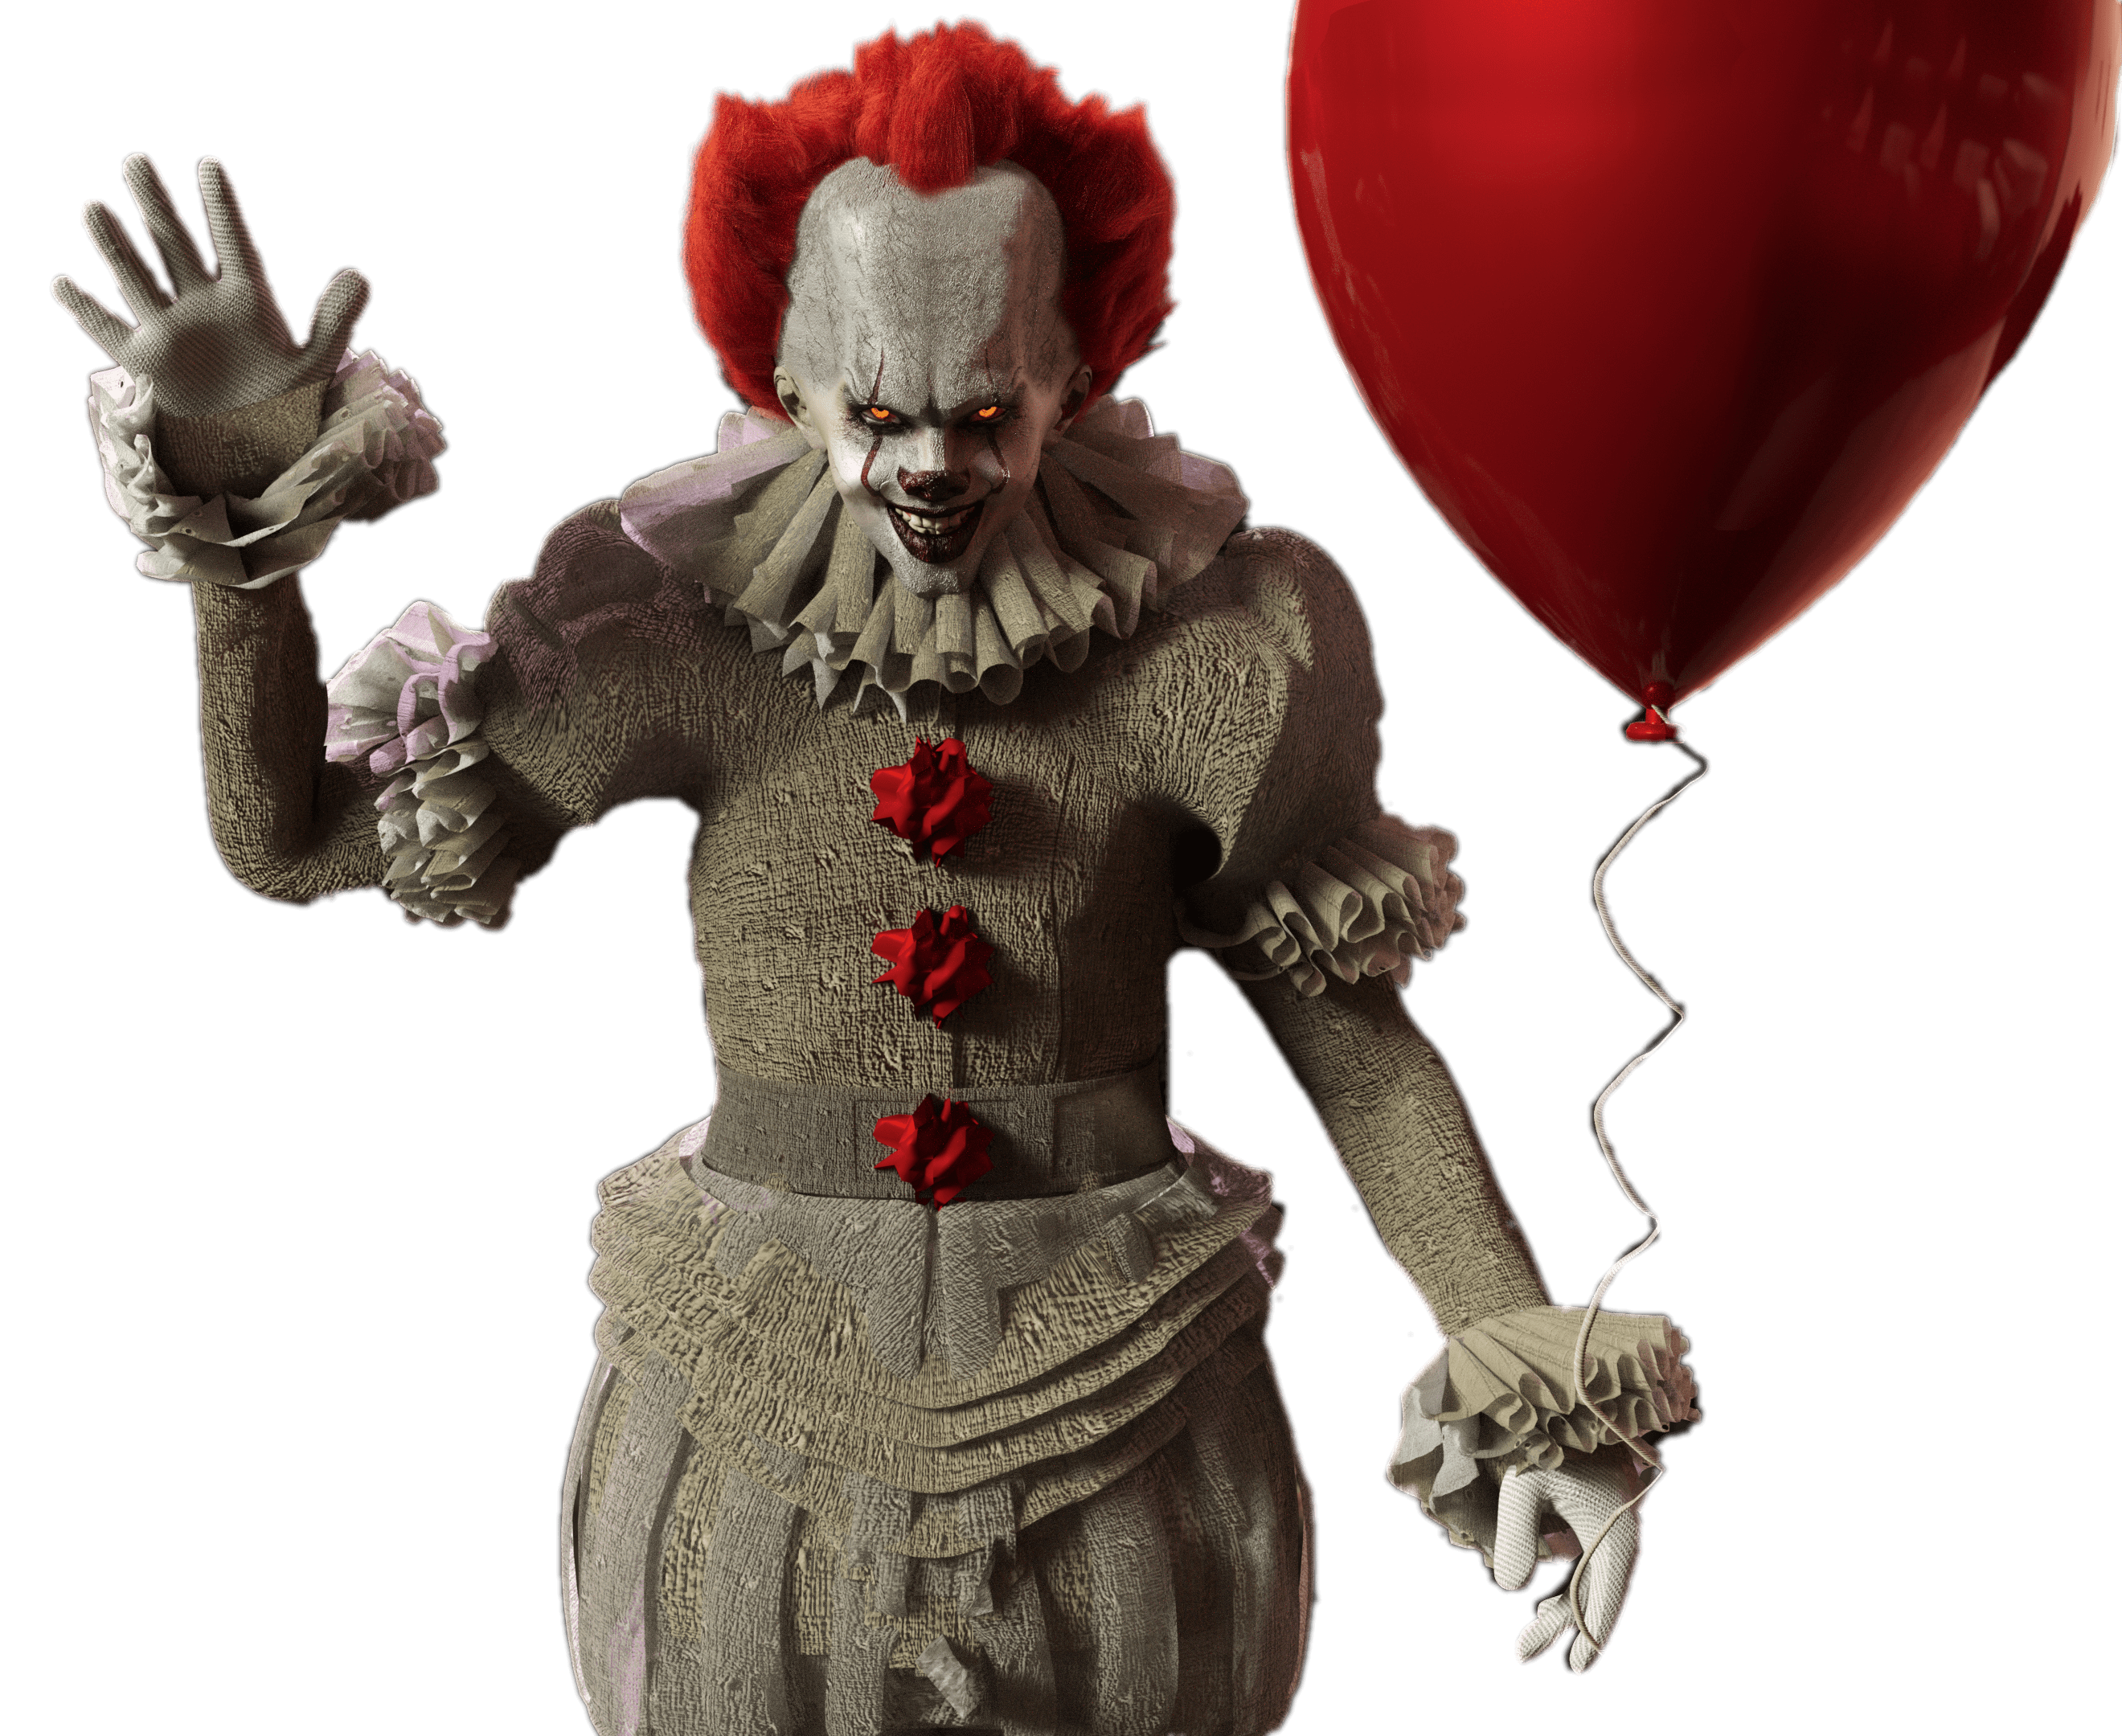 Balloon clipart pennywise, Balloon pennywise Transparent FREE for